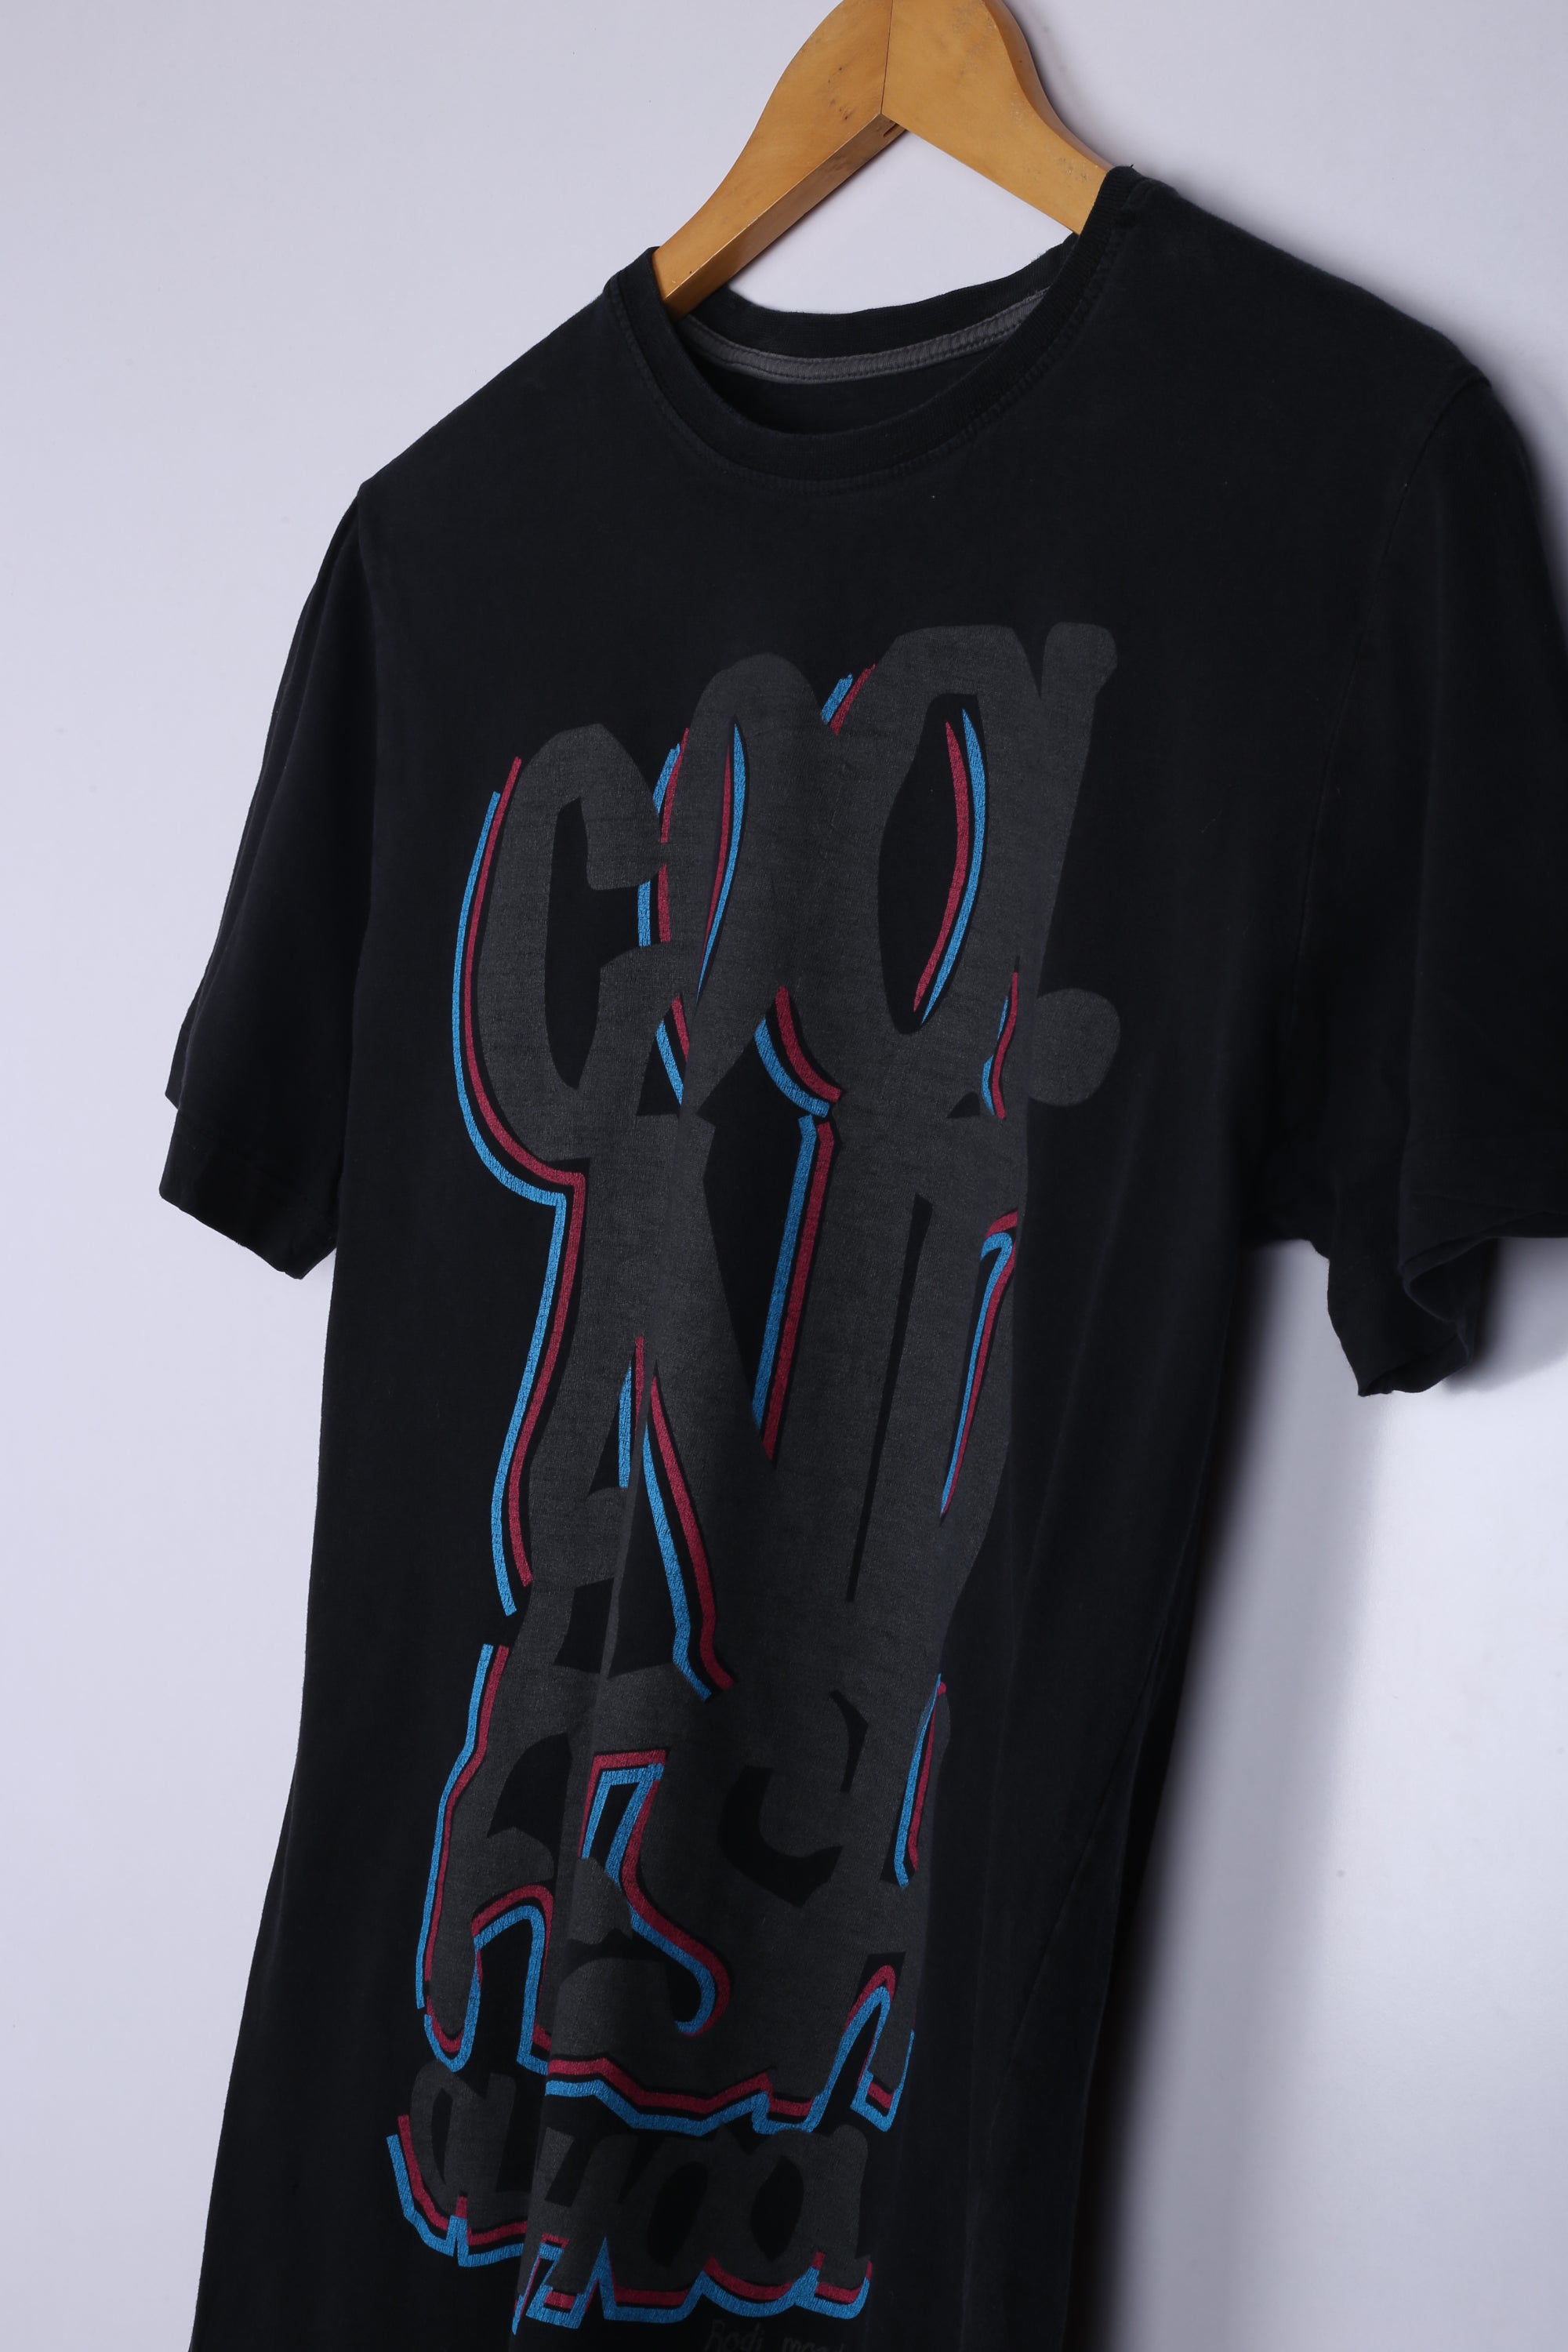 Vintage Cool Graphic Tee Black Small